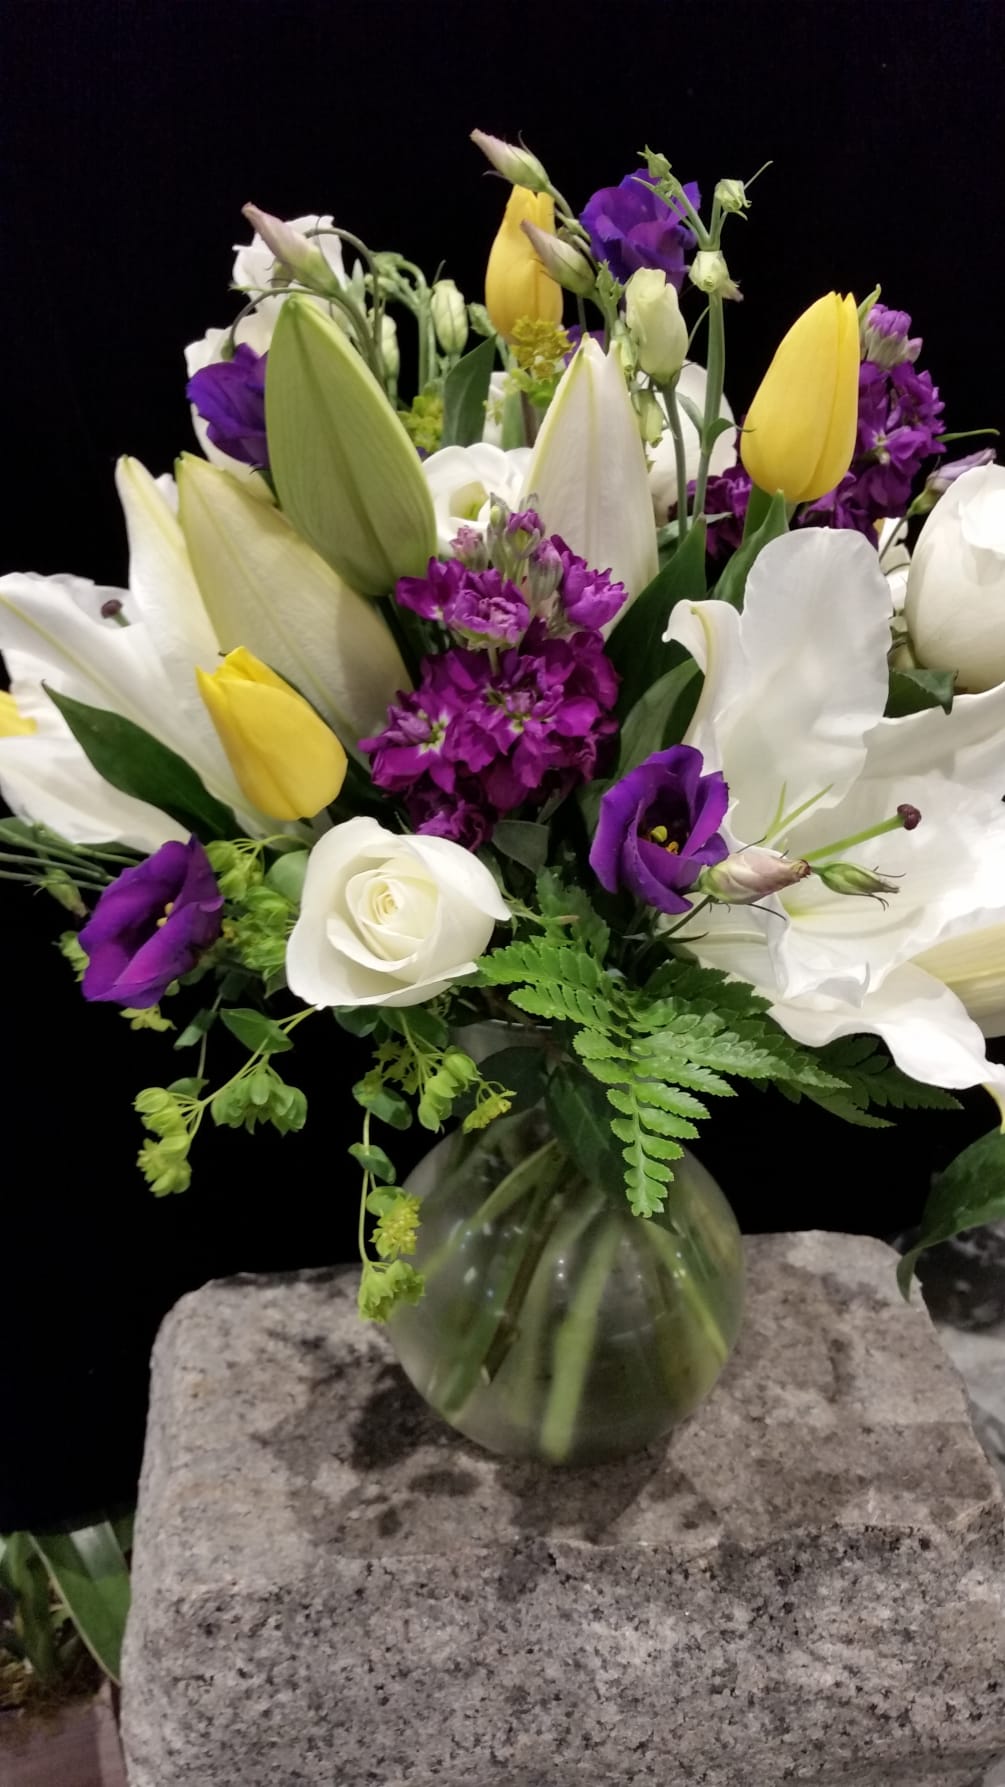 A sweetheart vase, a few white Oriental lilies, purple stock, and yellow